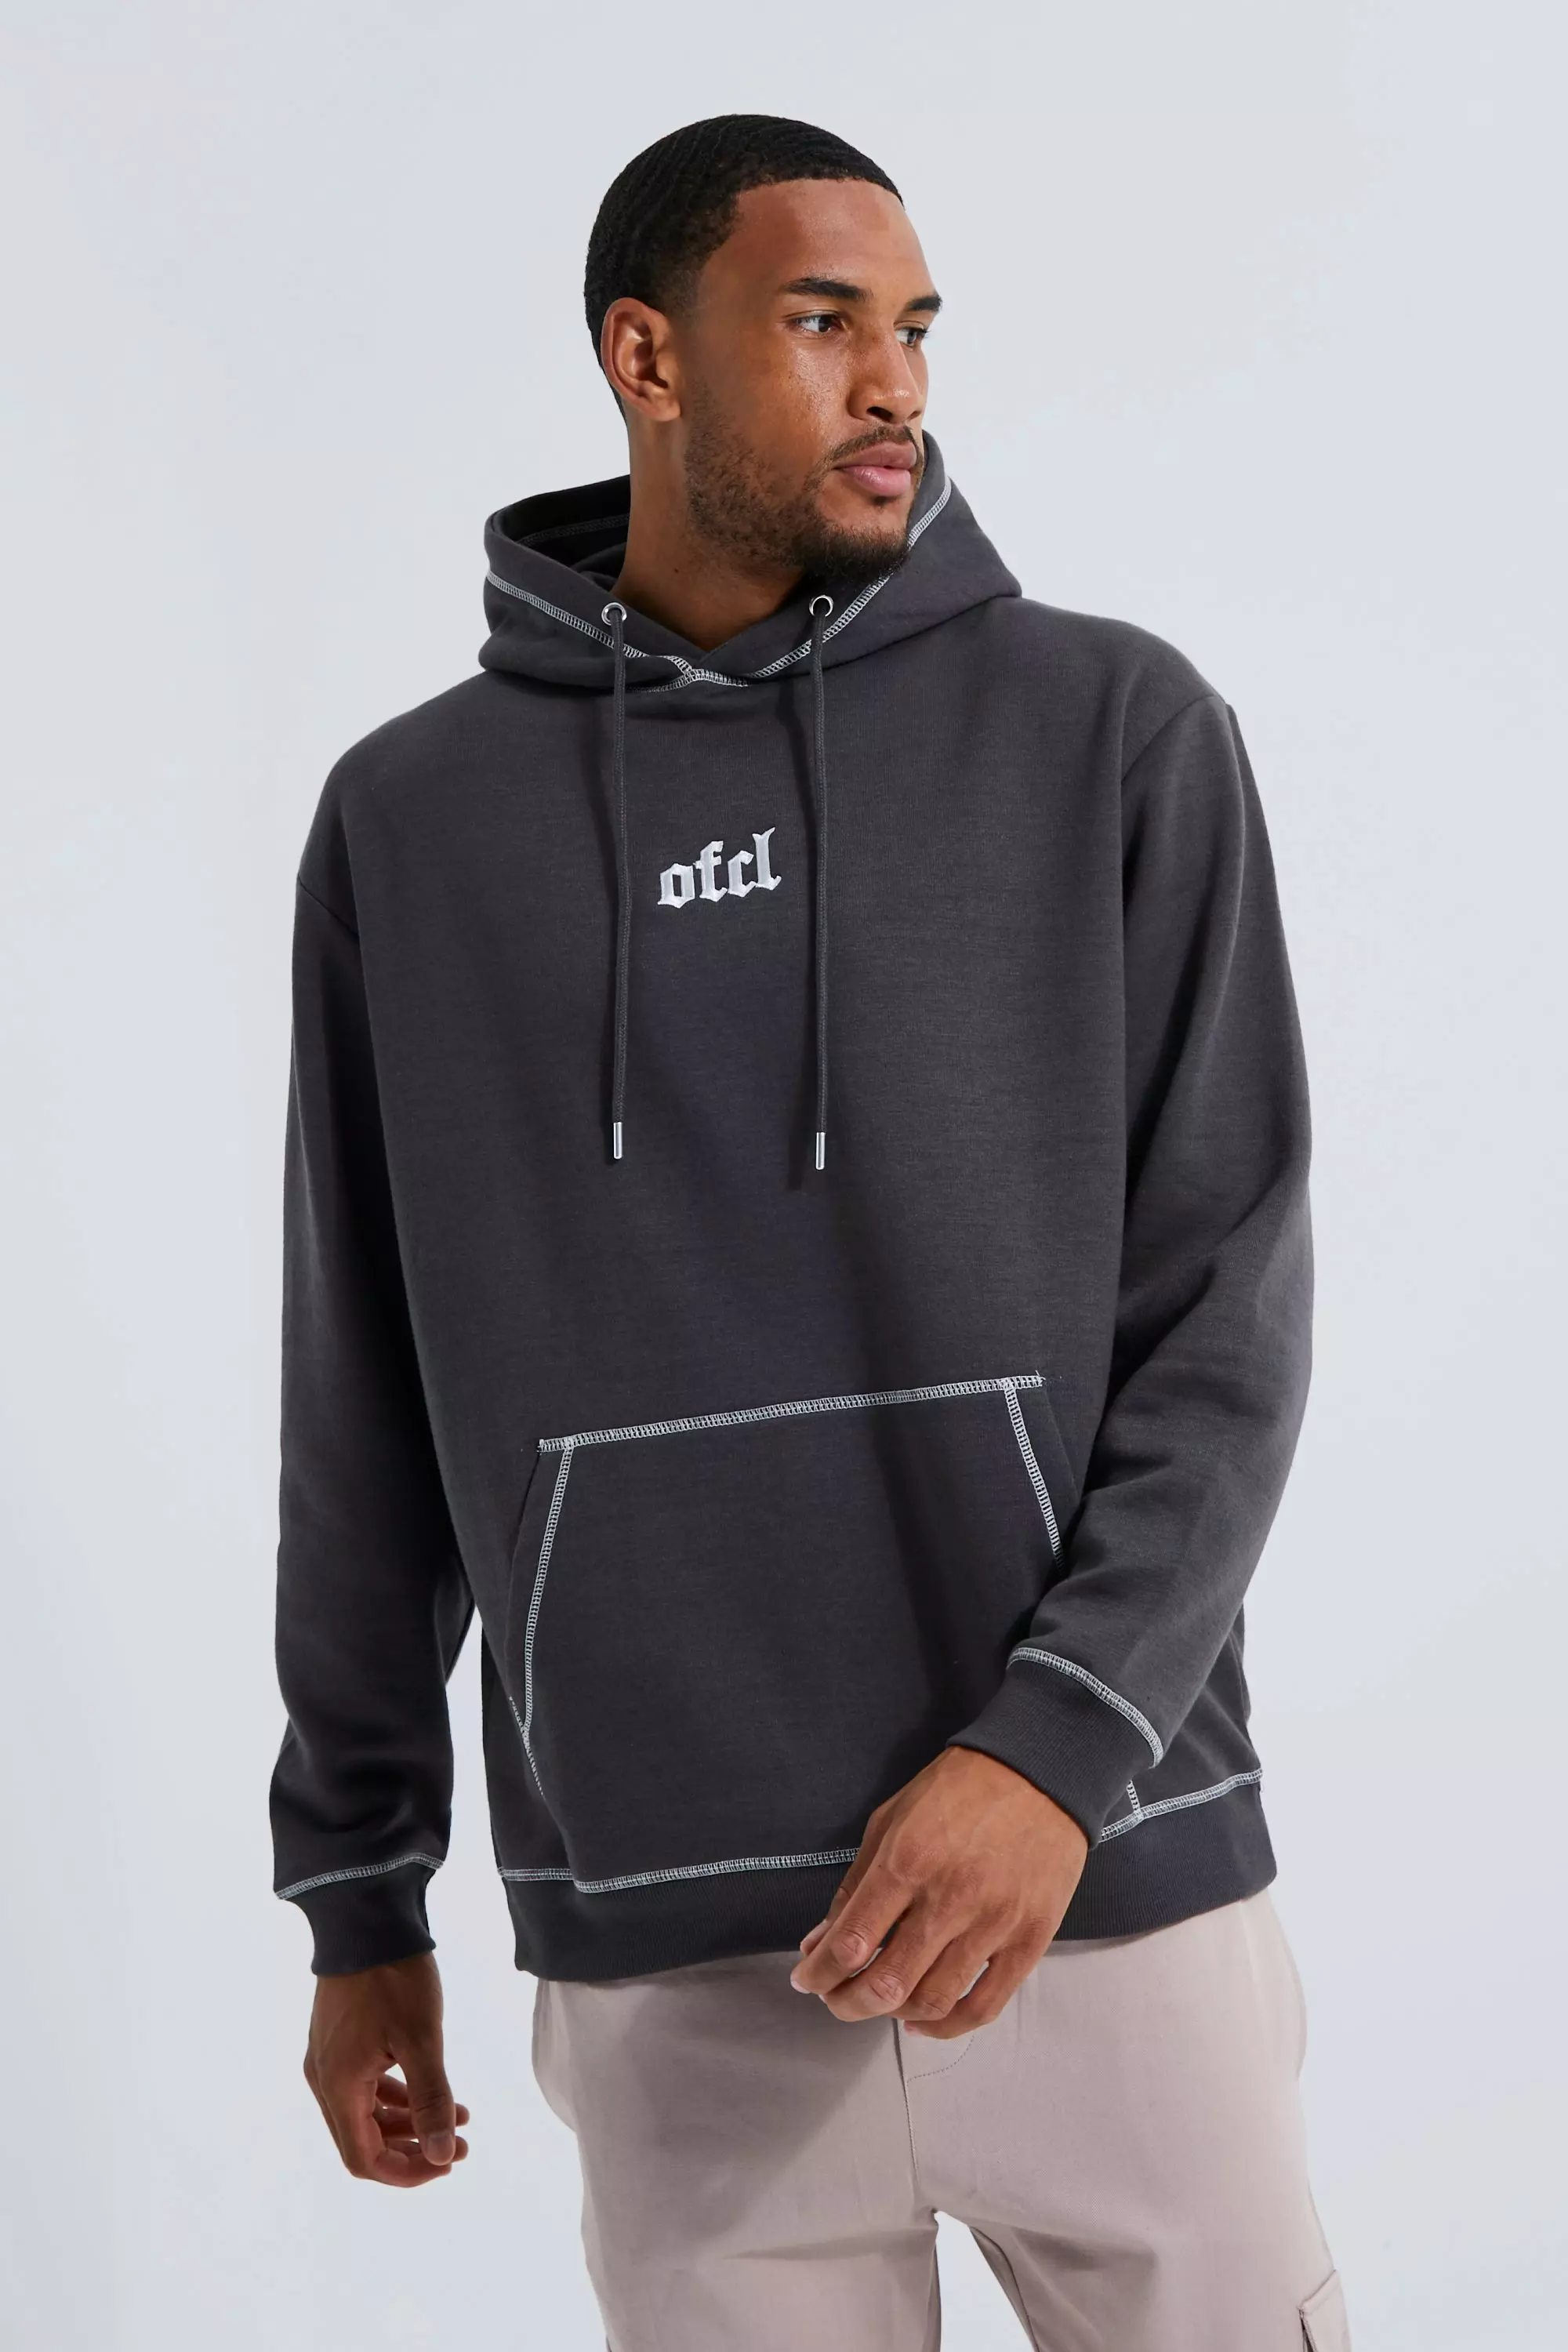 BDG Urban Outfitters Blanket Stitch Zip Up Hooded Jacket